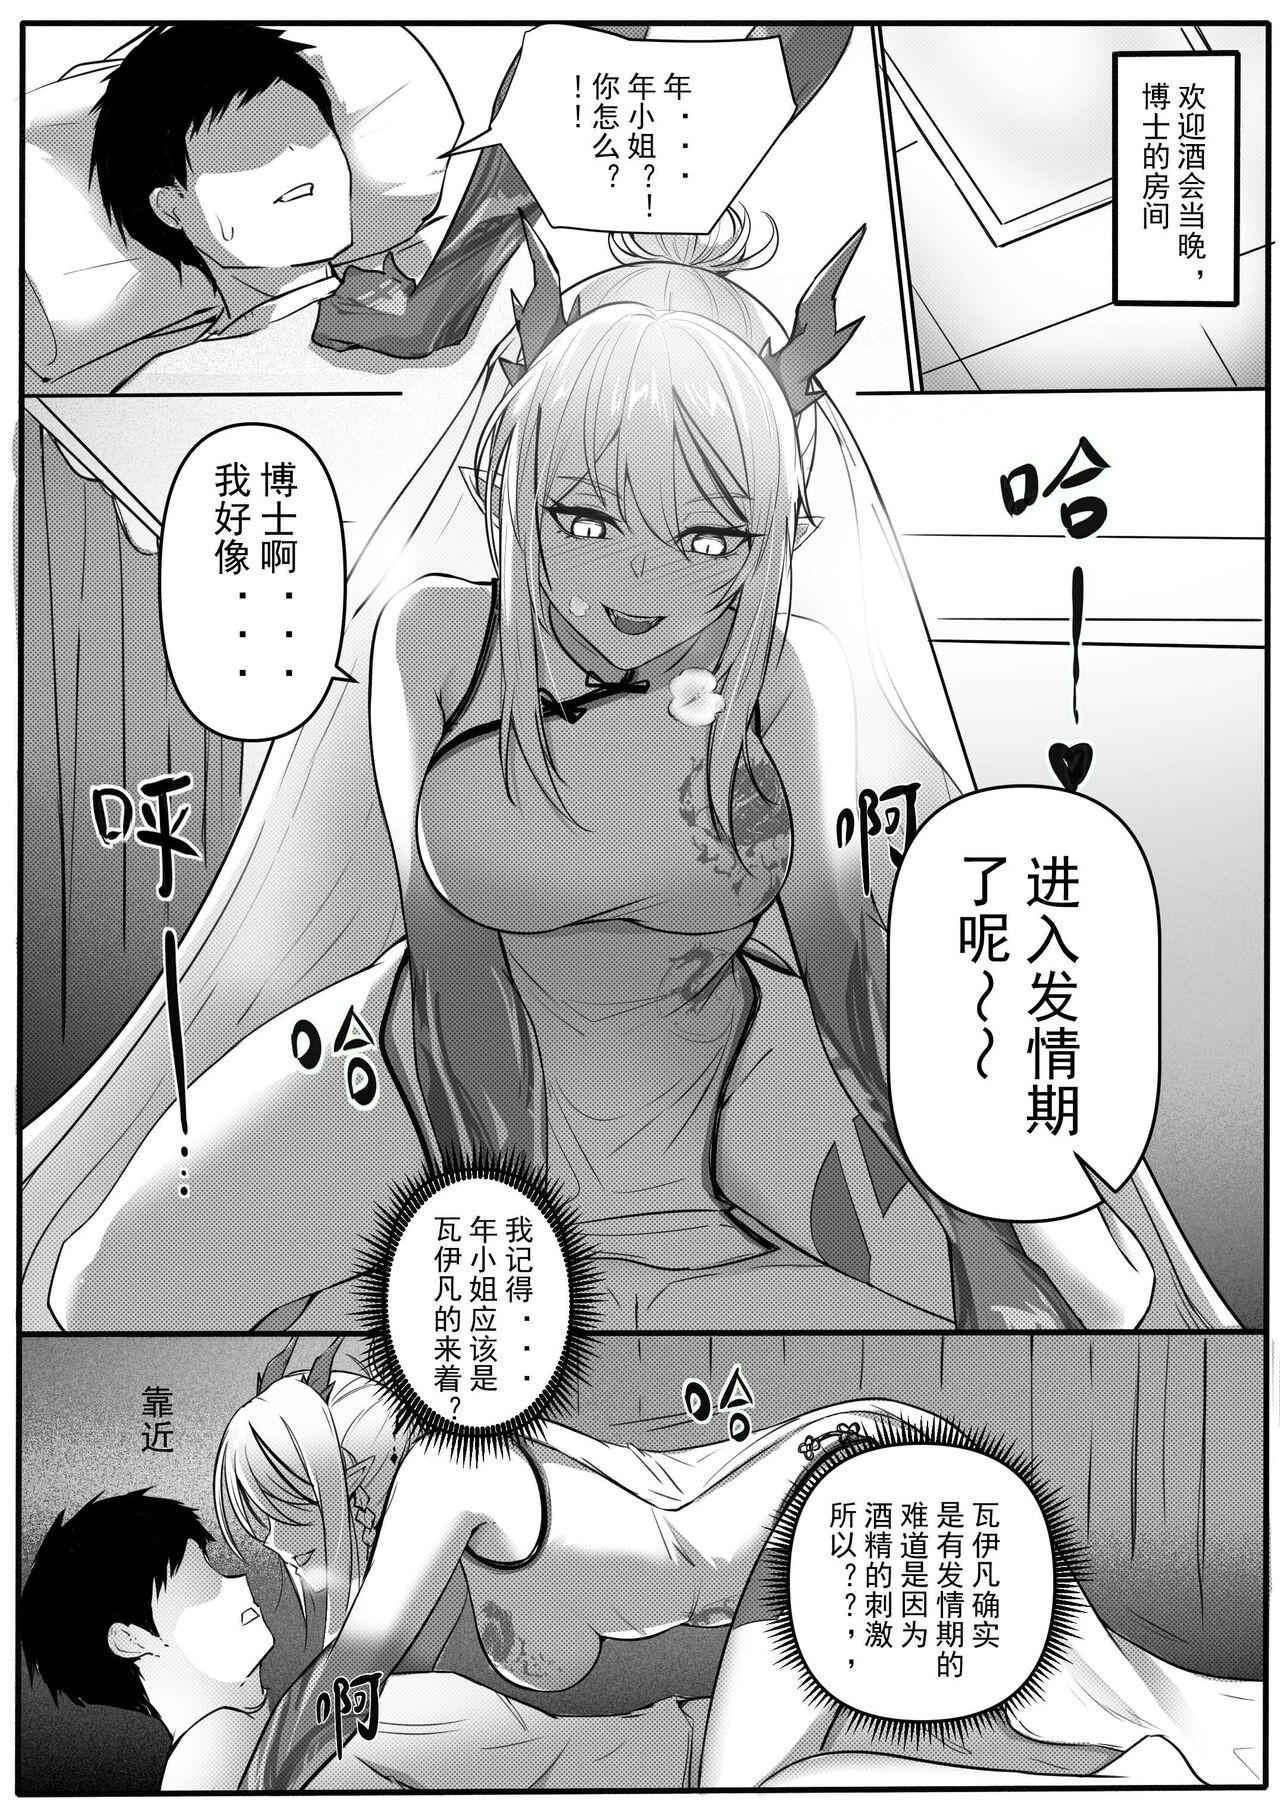 Naked Women Fucking 干员性爱秘闻录·年の欲情依存 - Arknights Girl On Girl - Page 7